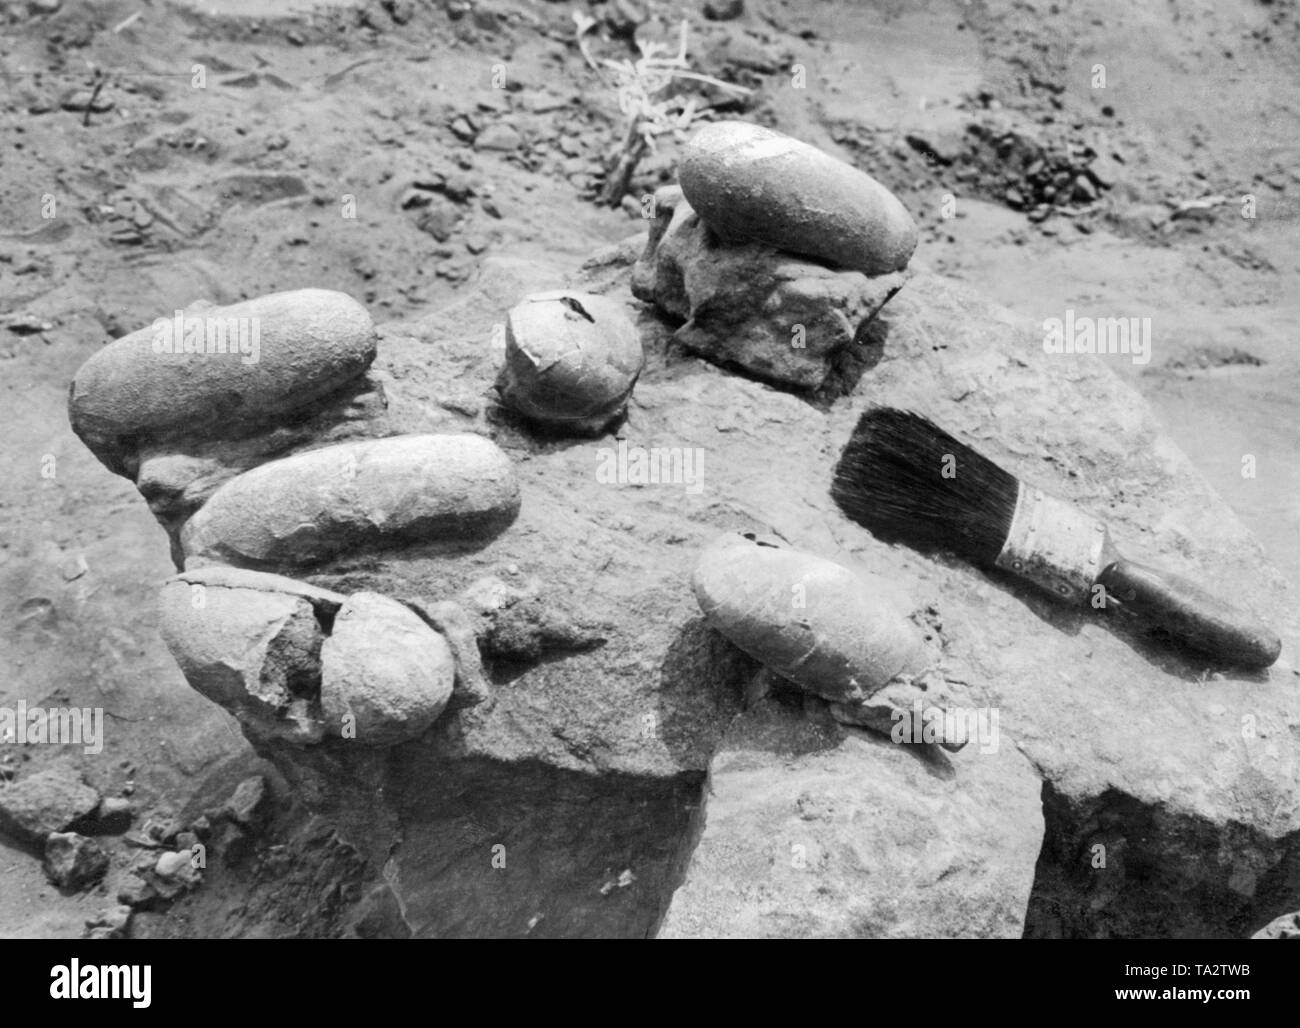 This photograph shows the find of dinosaur eggs in situ. Dr. Roy Chapman Andrews, head of the Central Asian Expedition of the American Natural History Museum brought these eggs from the Gobi Desert in Mongolia. Stock Photo